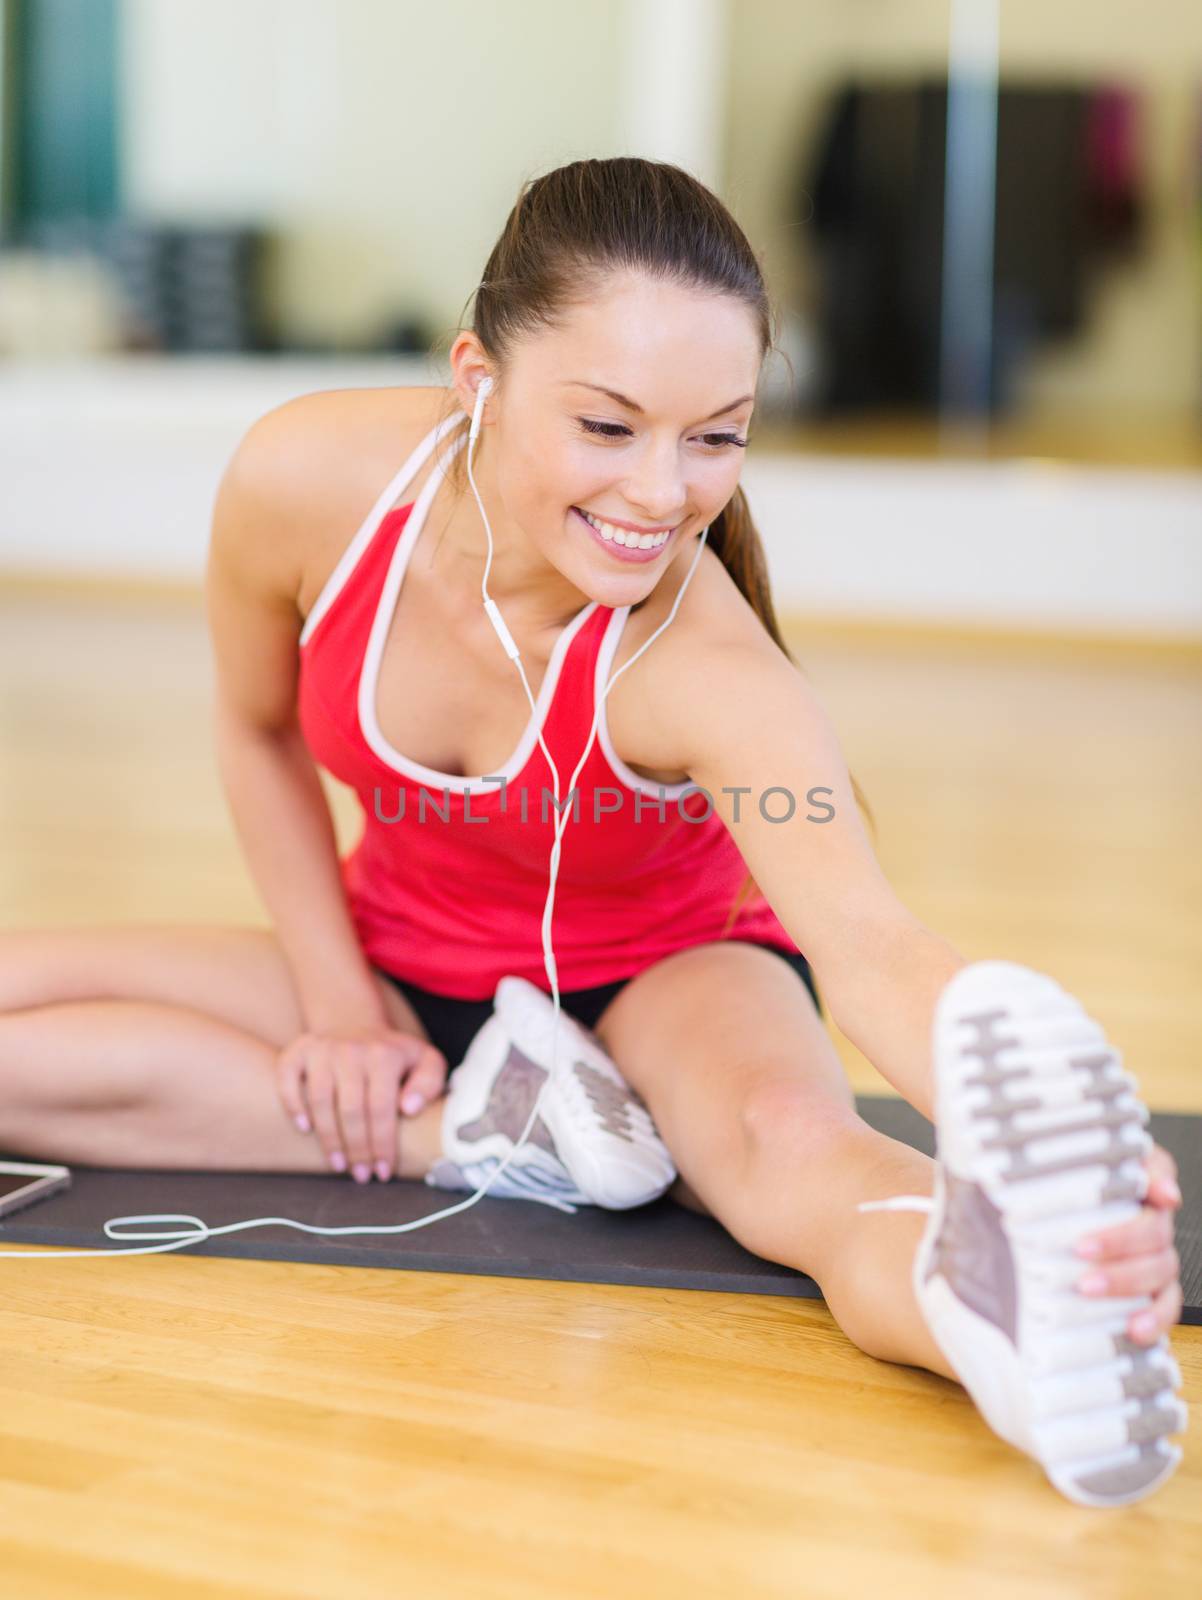 fitness, sport, training, gym, technology and lifestyle concept - smiling teenage girl with smartphone and earphones in gym